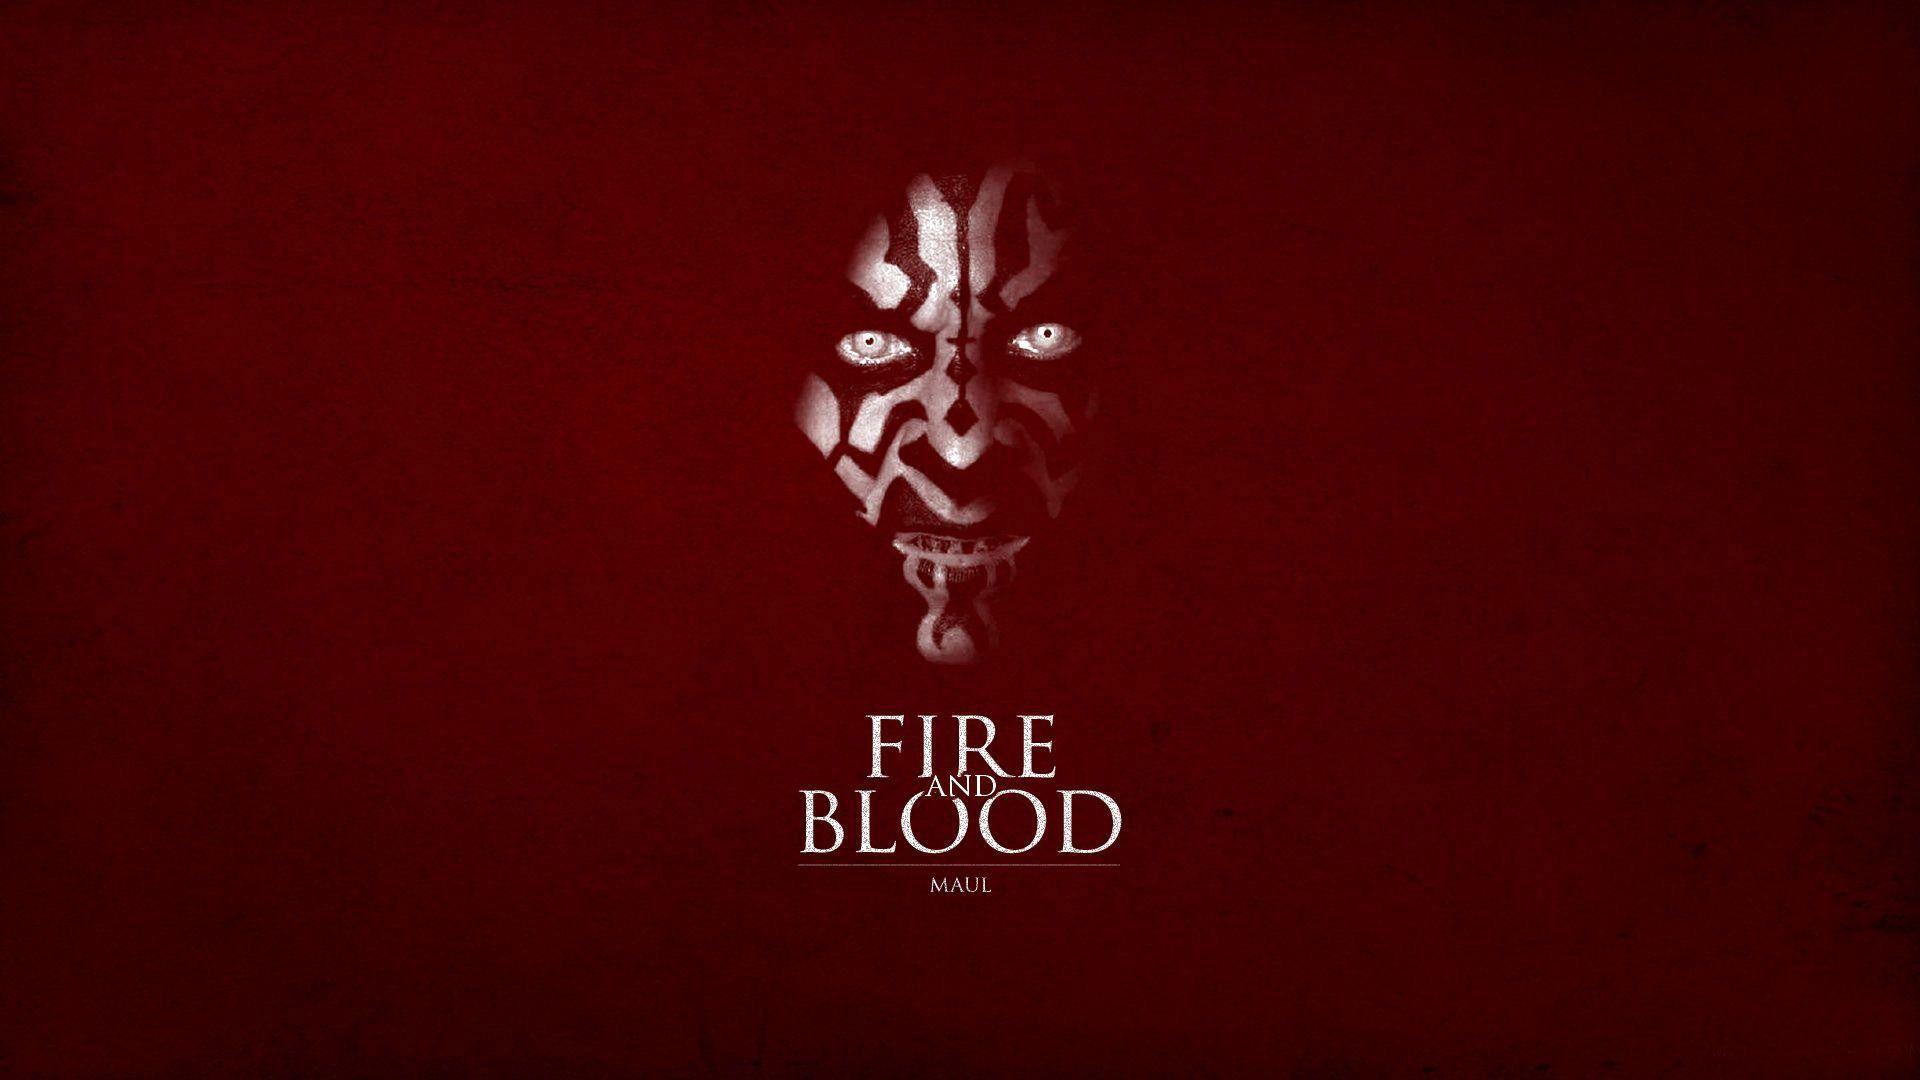 1920x1080 Star Wars Game of Thrones crossover hình nền